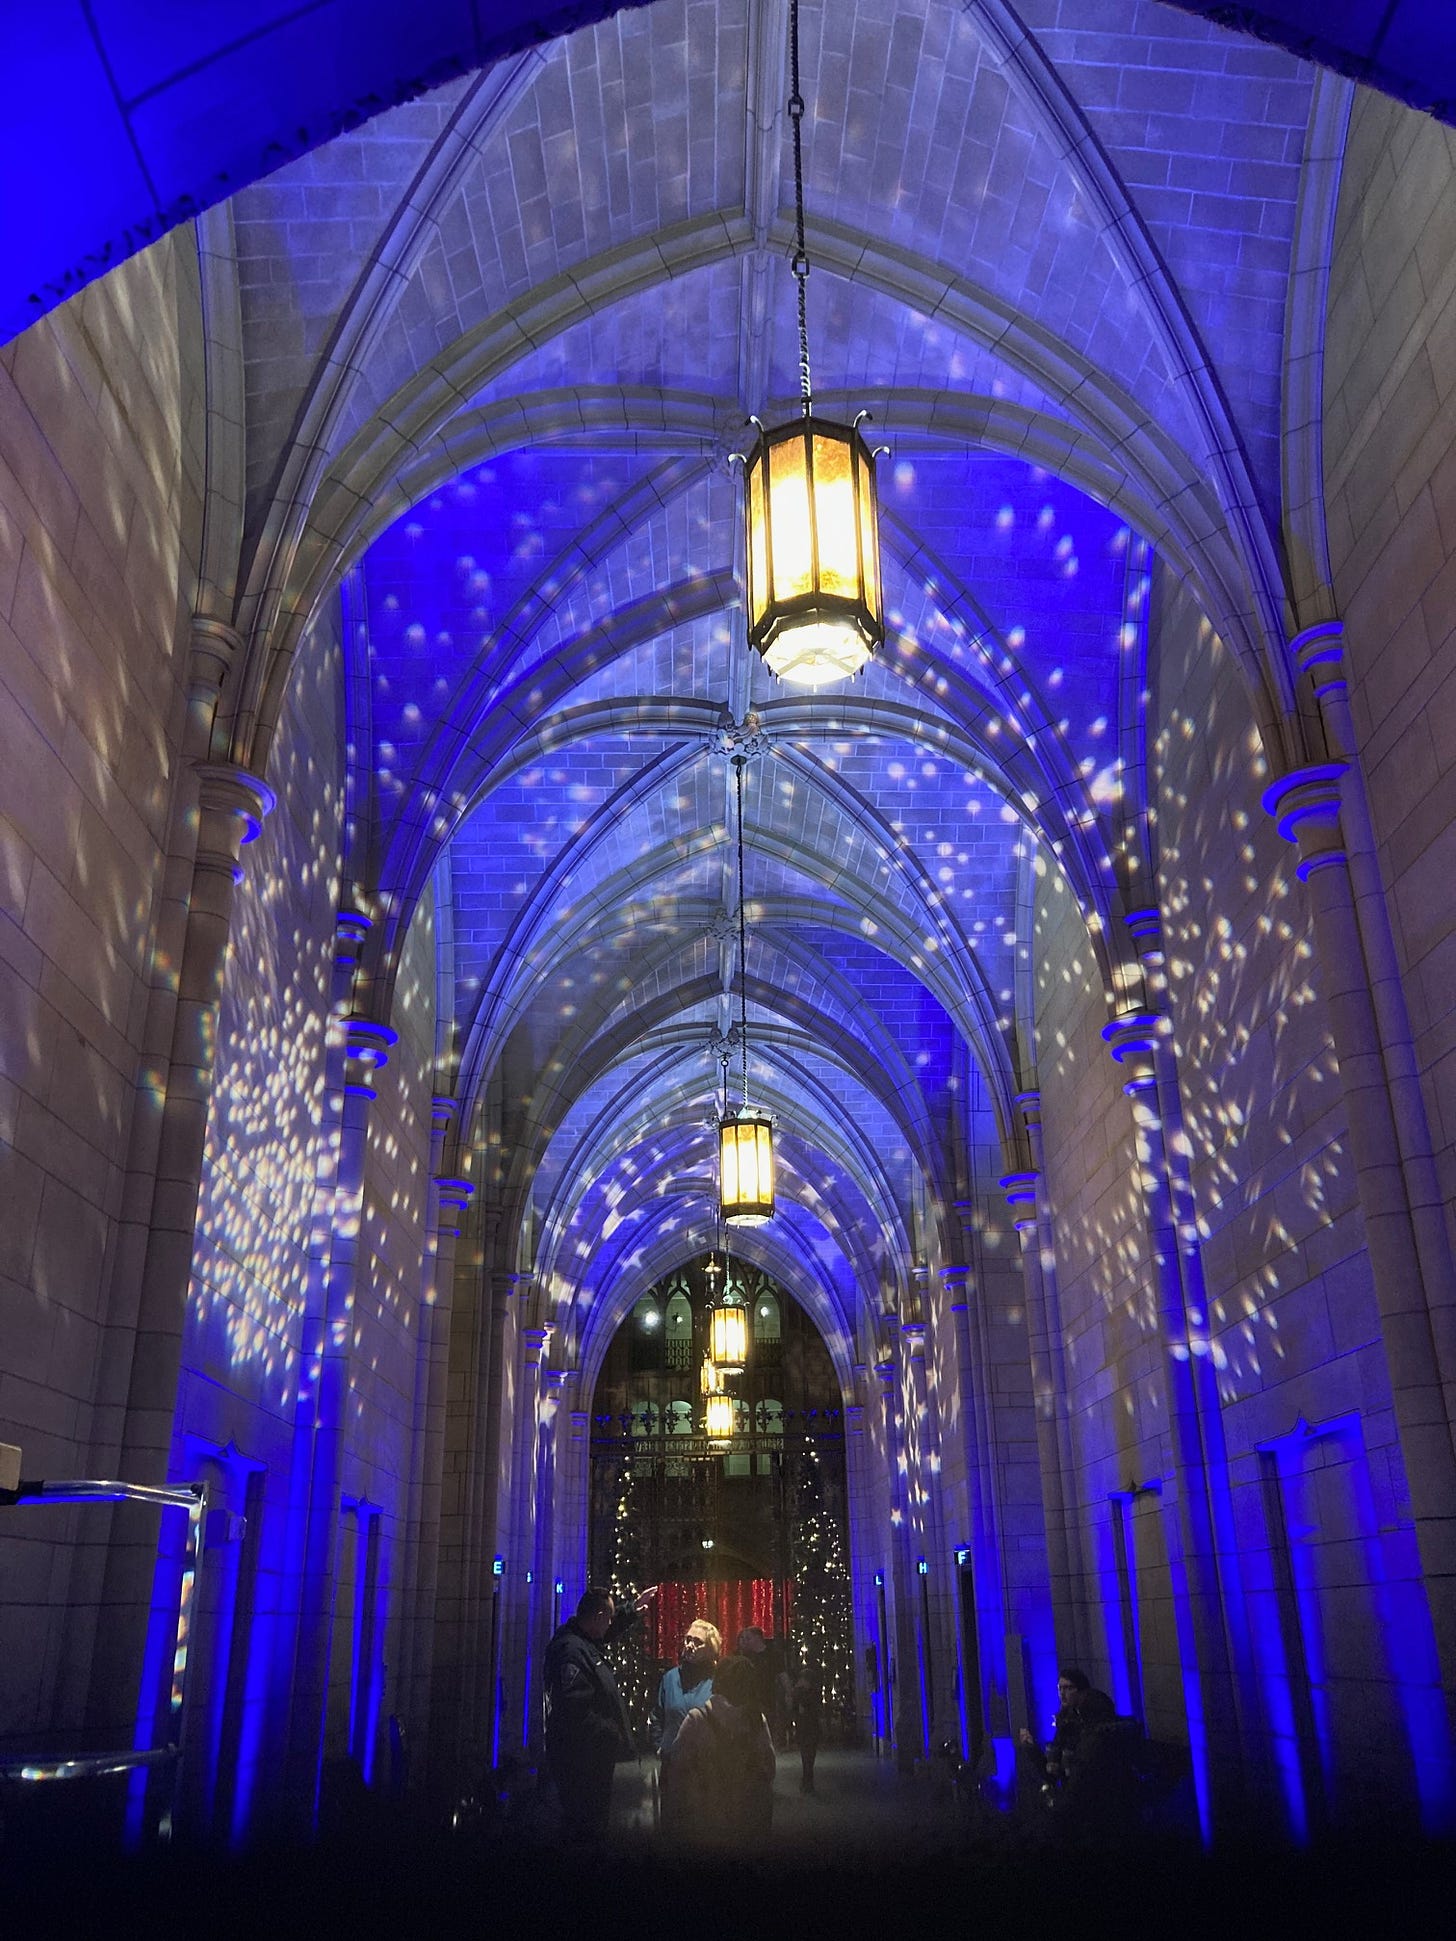 Gray stone gothic architecture interior with blue light background plus white snowflakes and stars projected on it. 